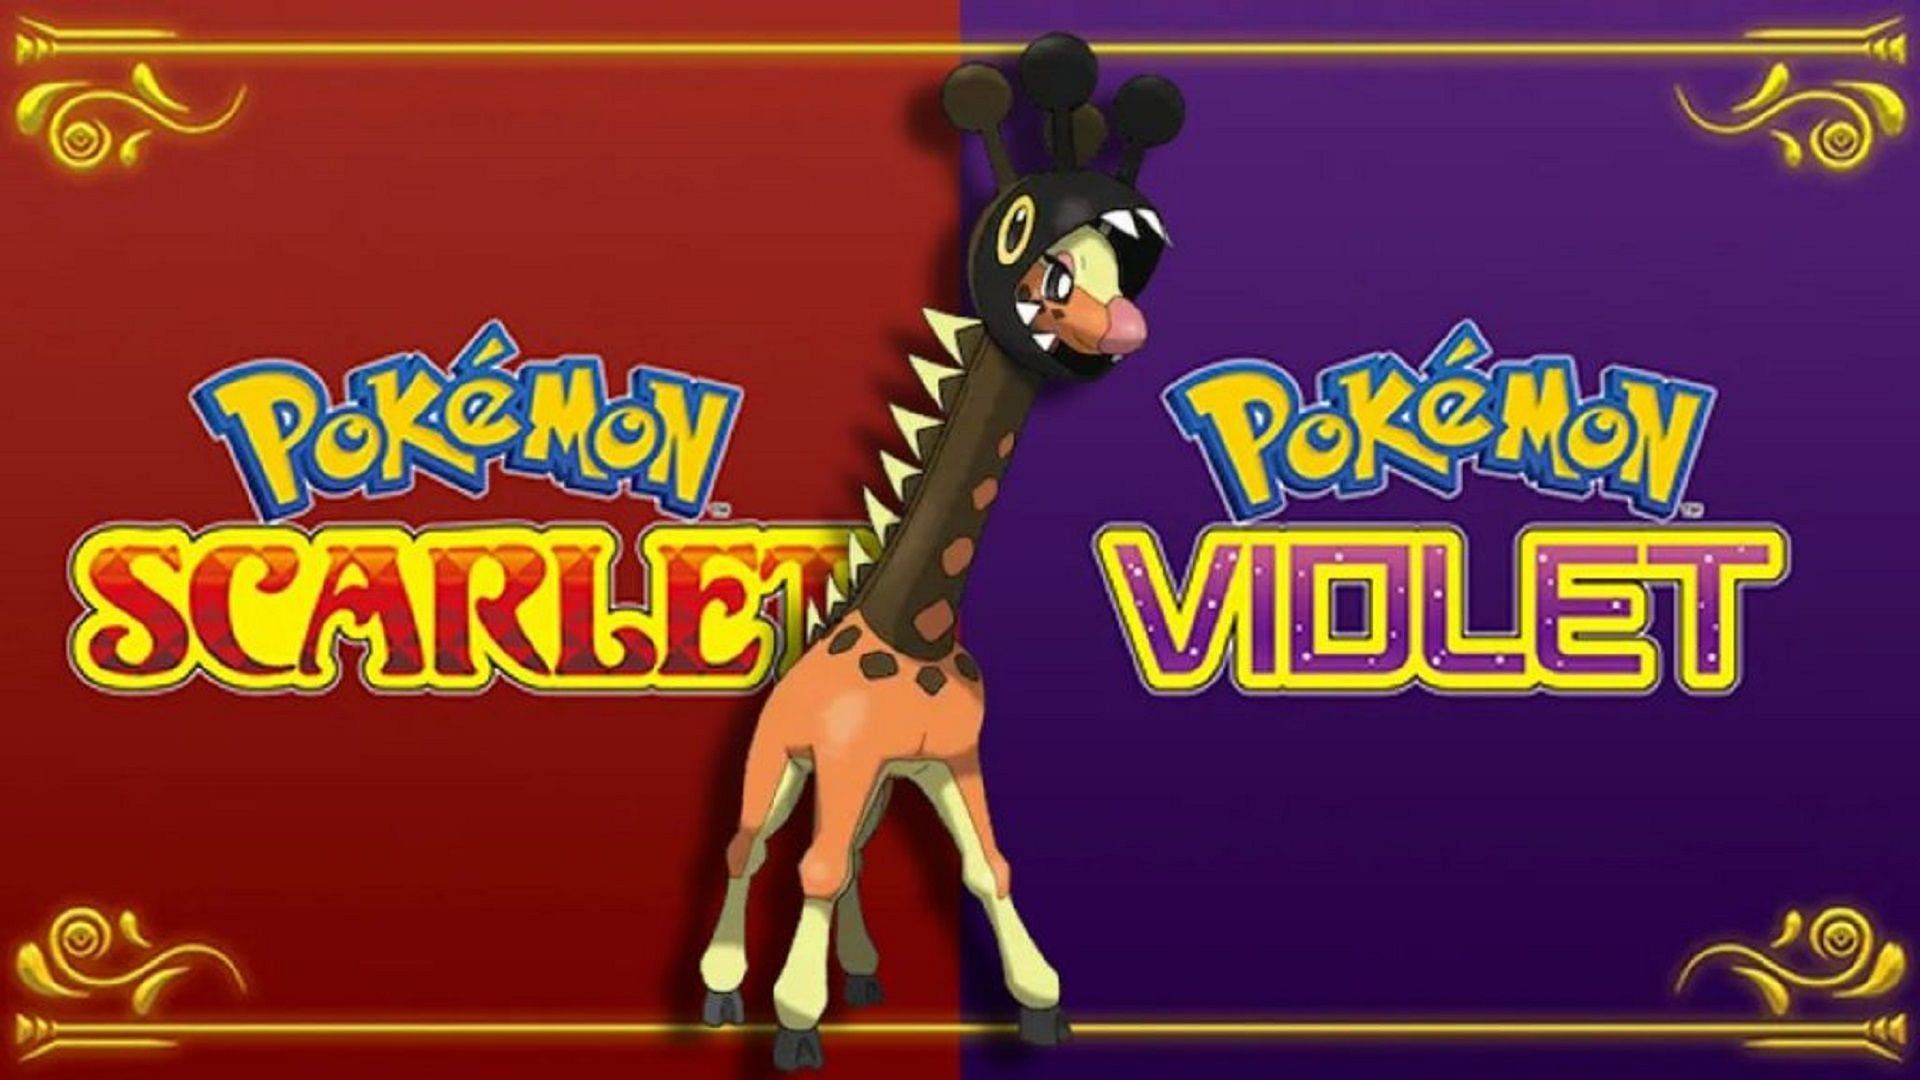 Farigiraf&#039;s introduction inPokemon Scarlet and Violet has created quite the buzz on social media (Image via Game Freak)